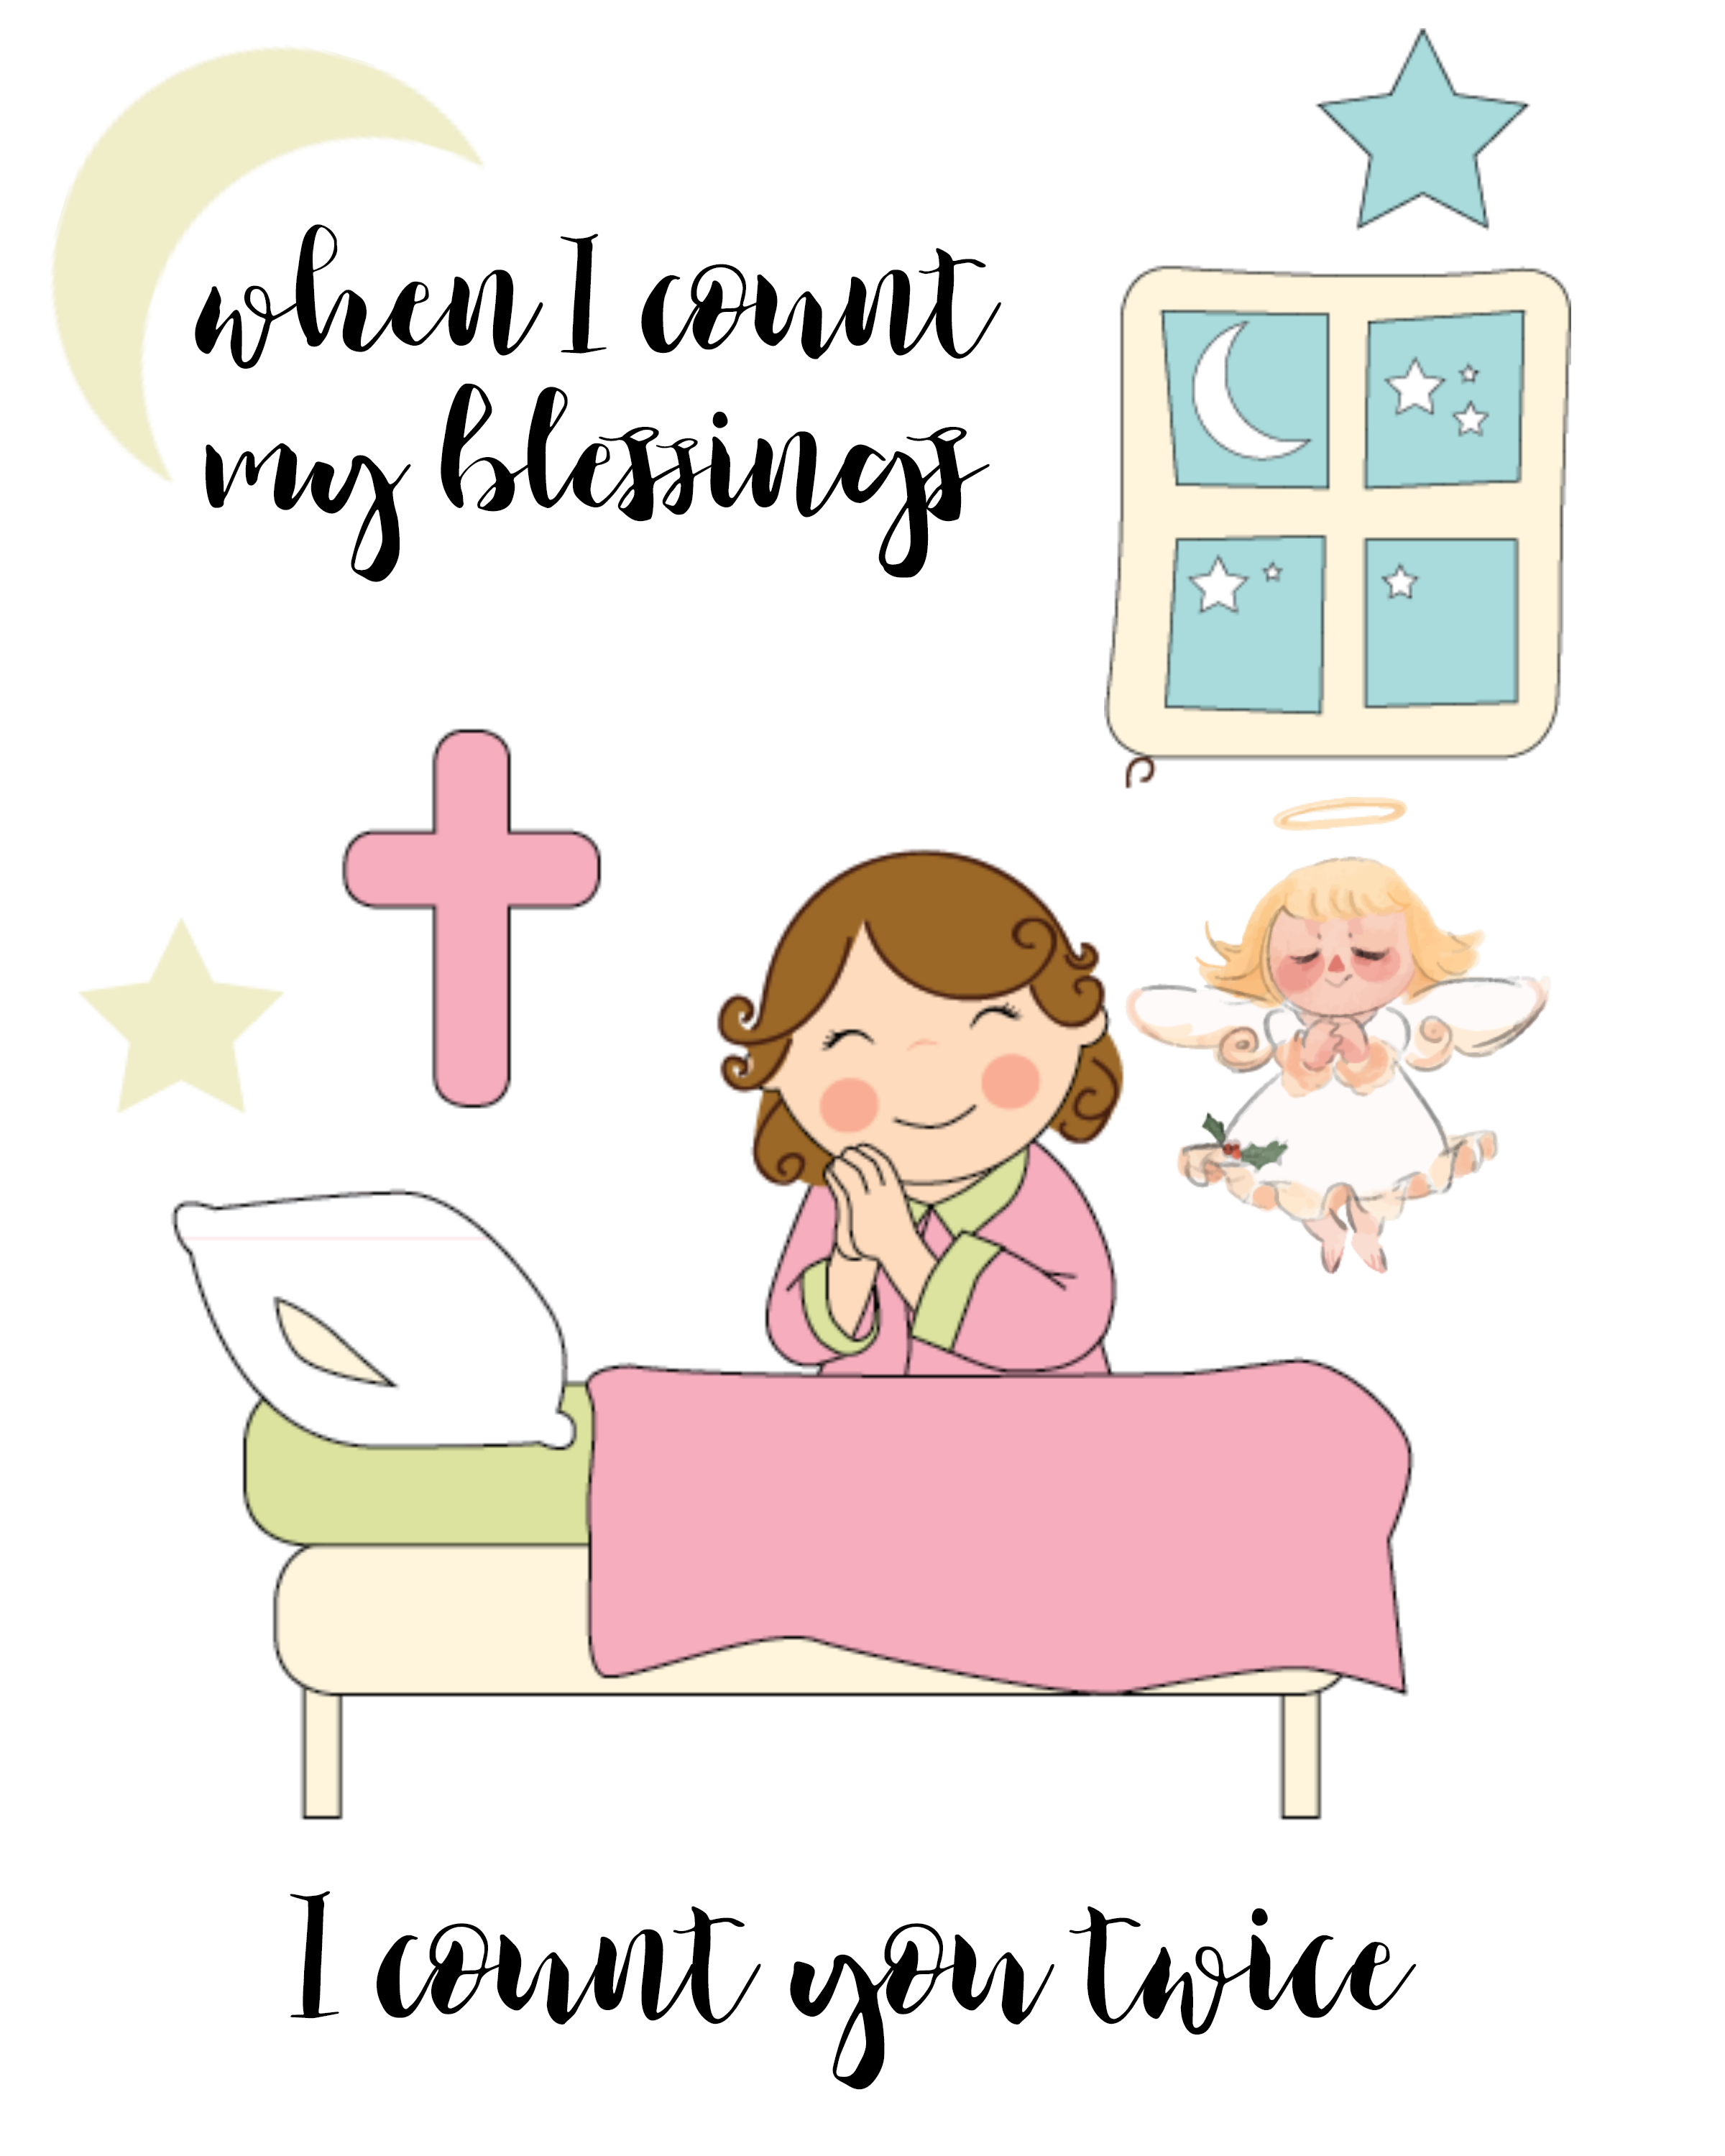 showering clipart blessing